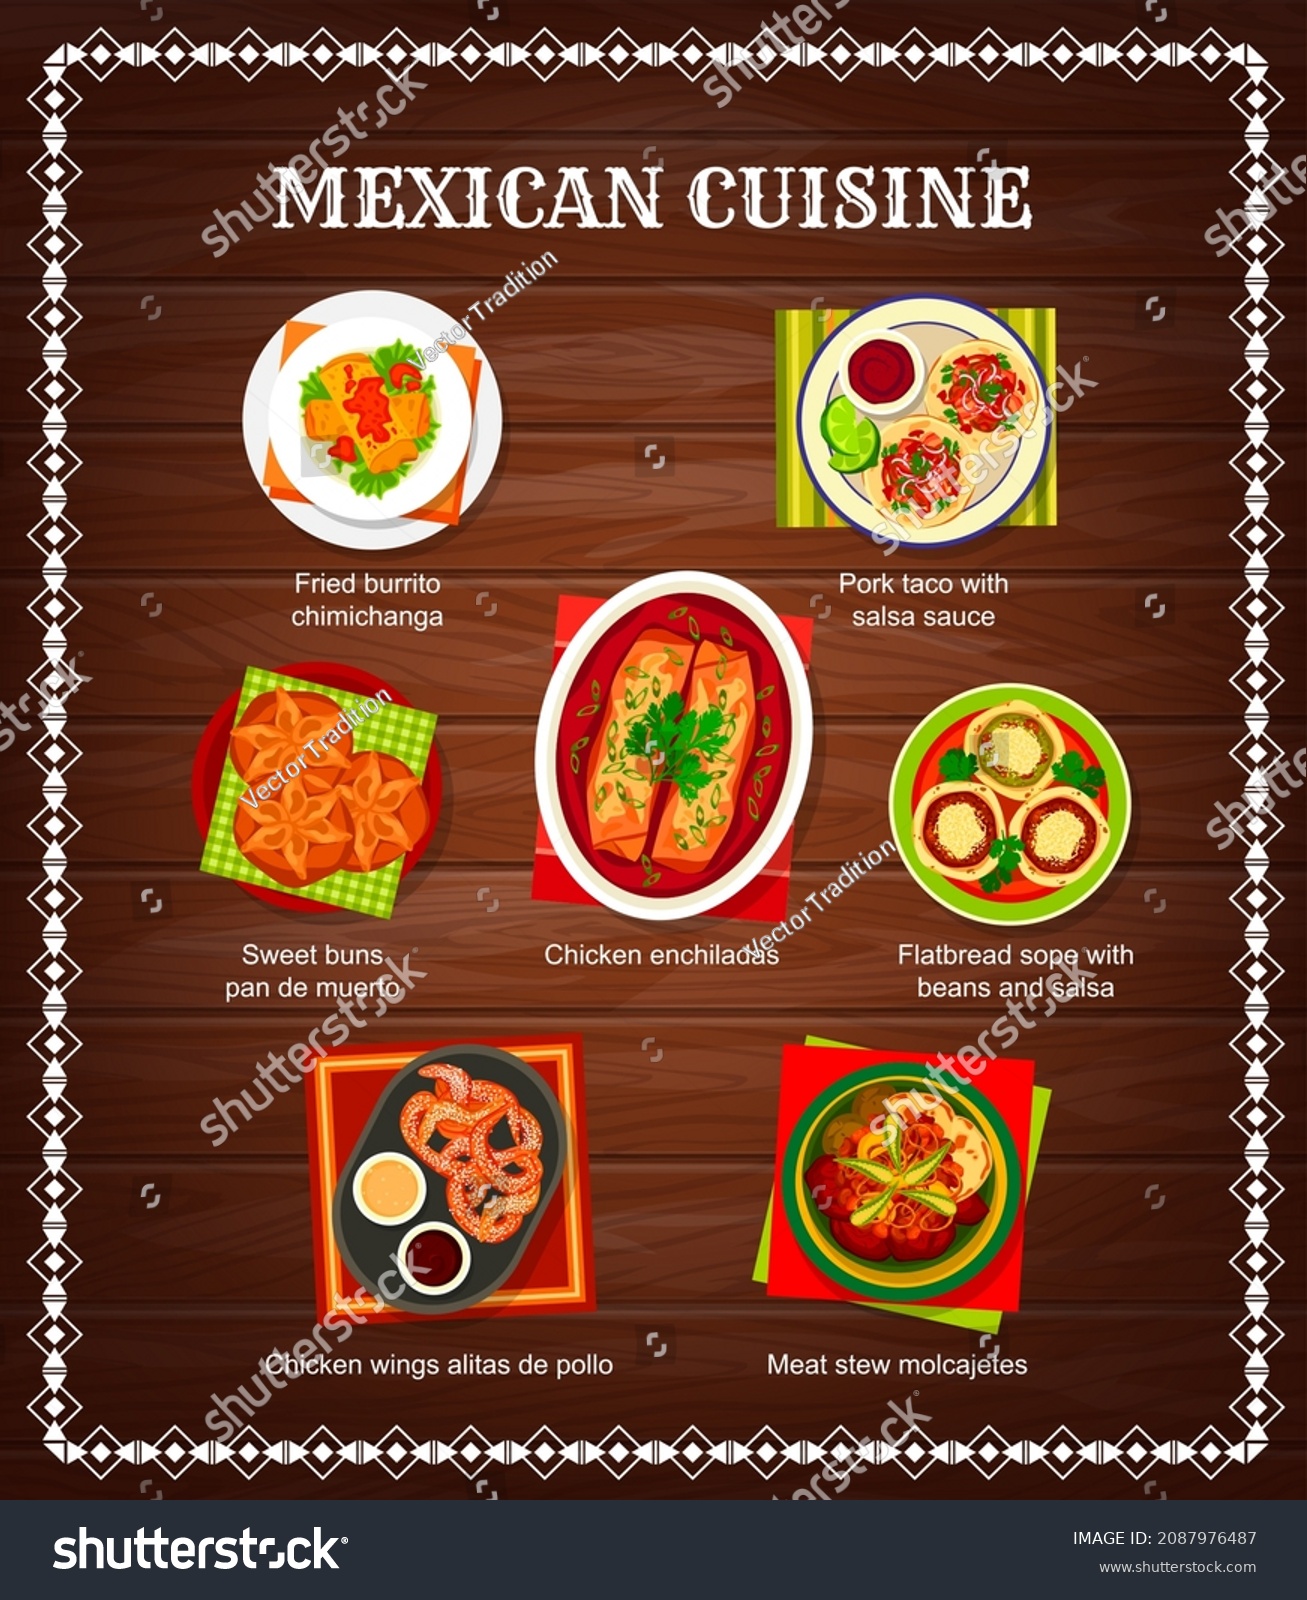 SVG of Mexican food menu, Mexico cuisine dishes and salsa for tacos and burritos, vector. Mexican cuisine restaurant menu of traditional food meals, meat stew, fried chicken chimichanga and sweet buns svg